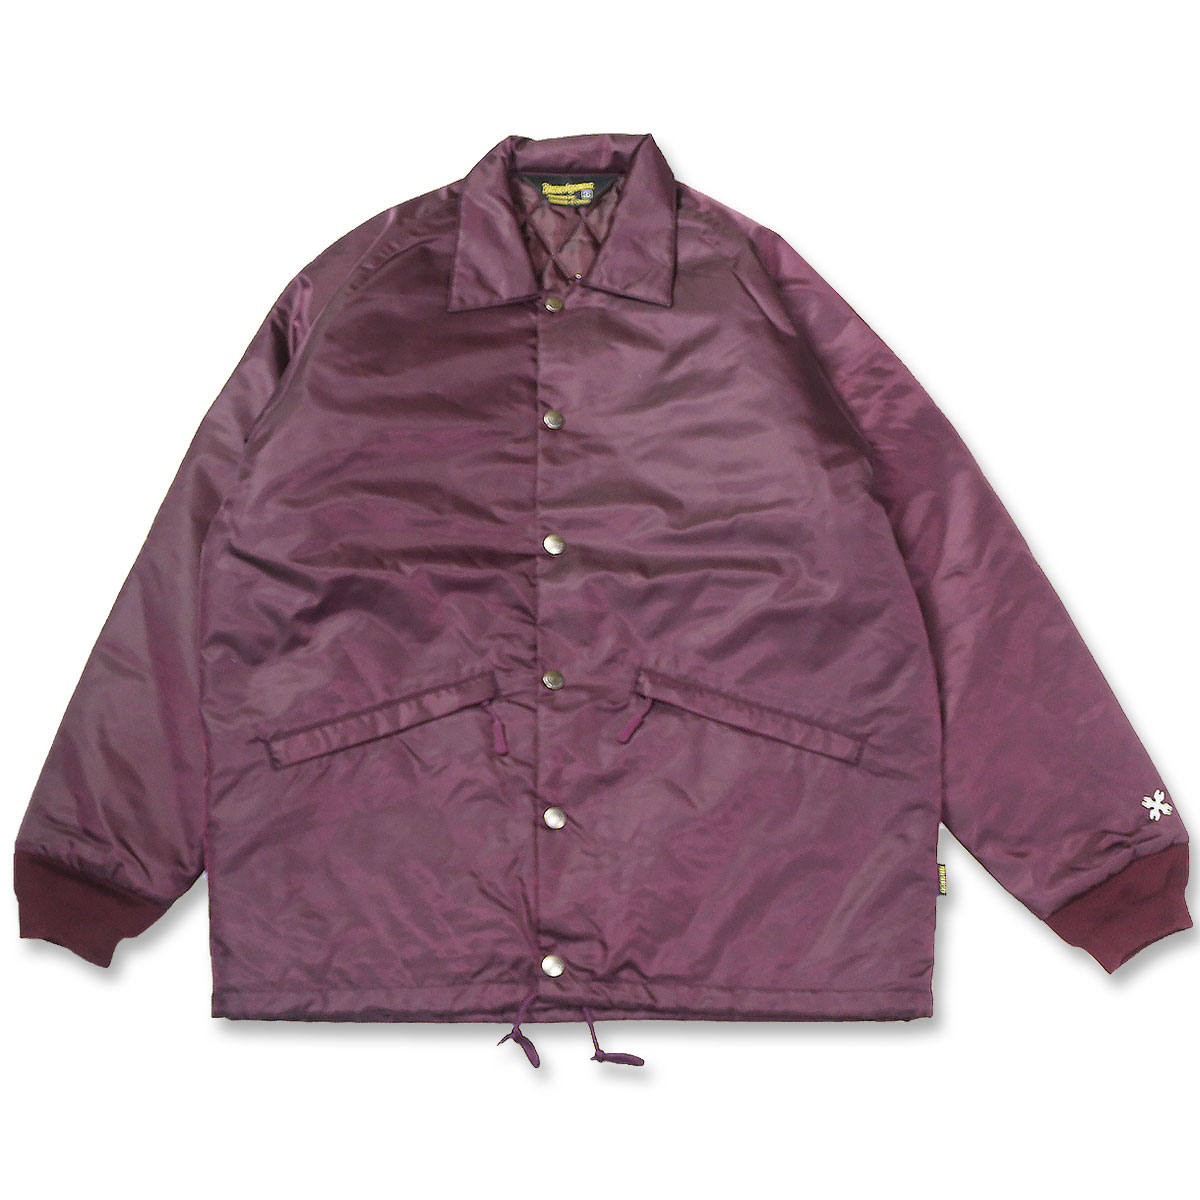 BLUCO(ブルコ) OL-051-022 QUILTING COACH JACKET 4色(BLK/BRG/NVY/OLV)☆送料無料☆｜pinsstore｜03